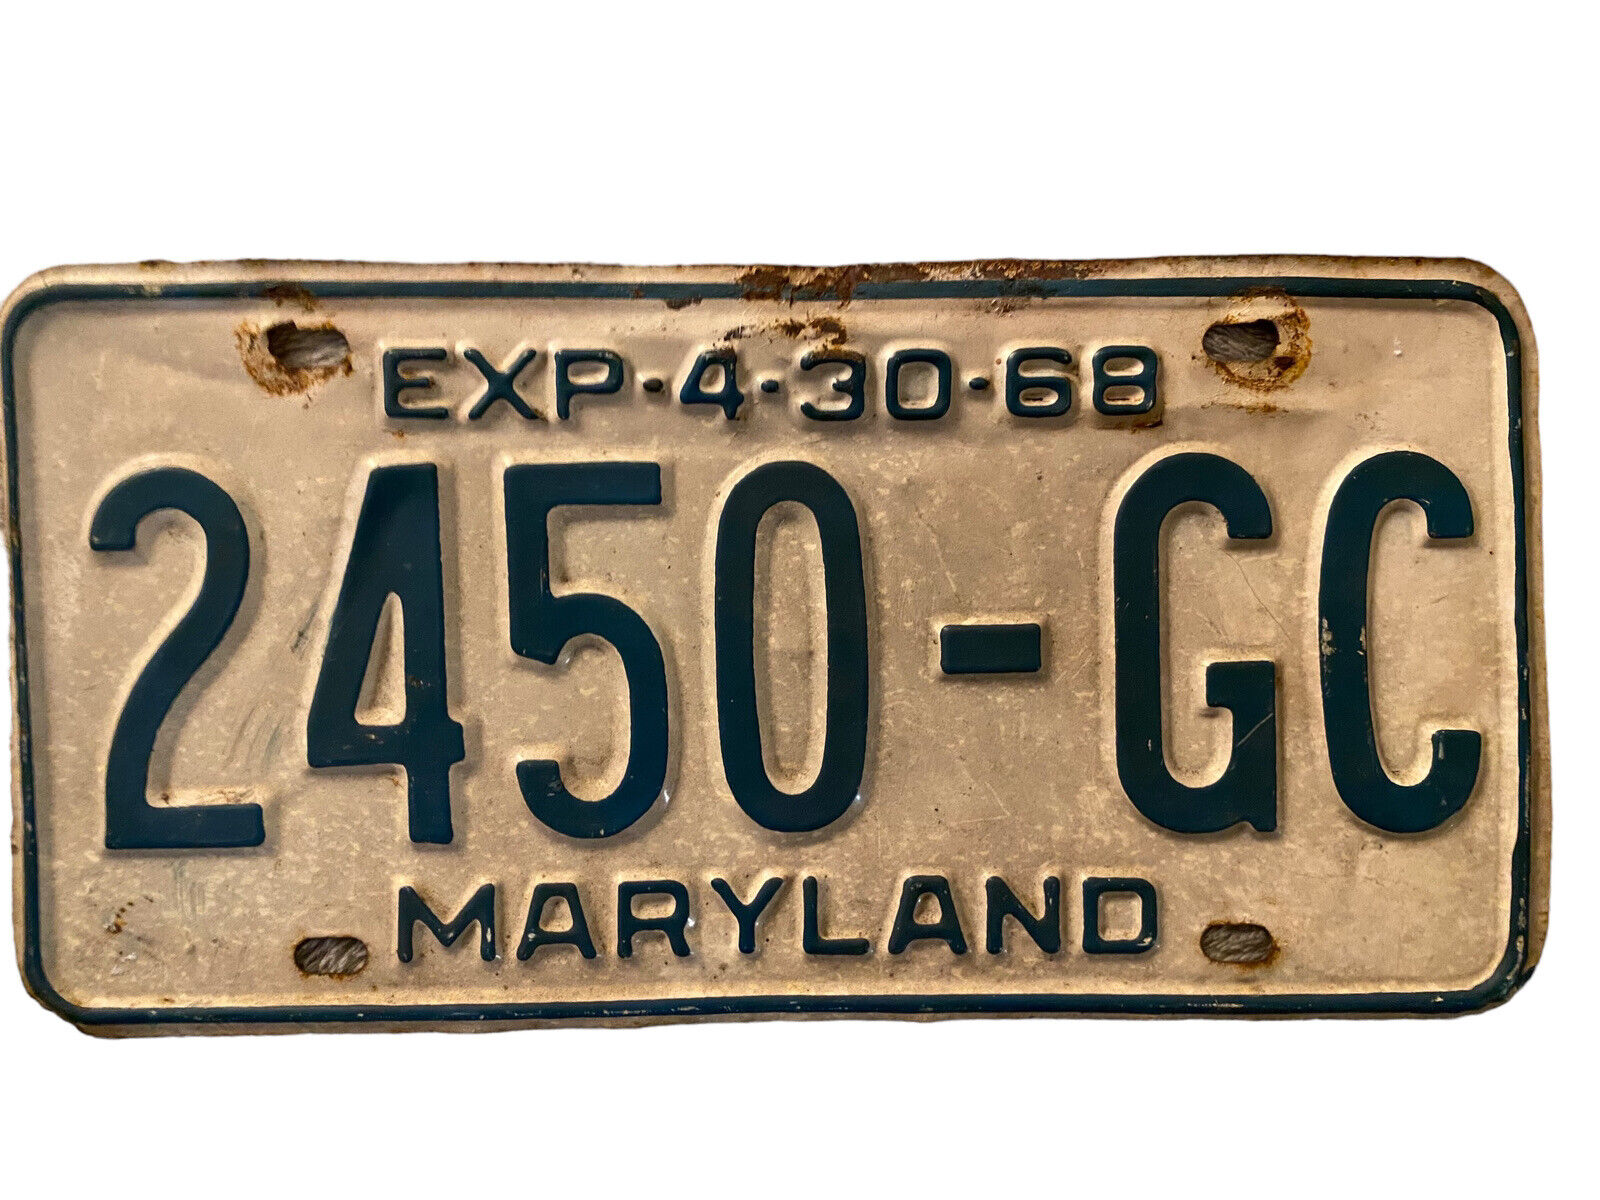 Vintage Maryland License Plate Tag White With Blue Lettering 4-30-68 Exp